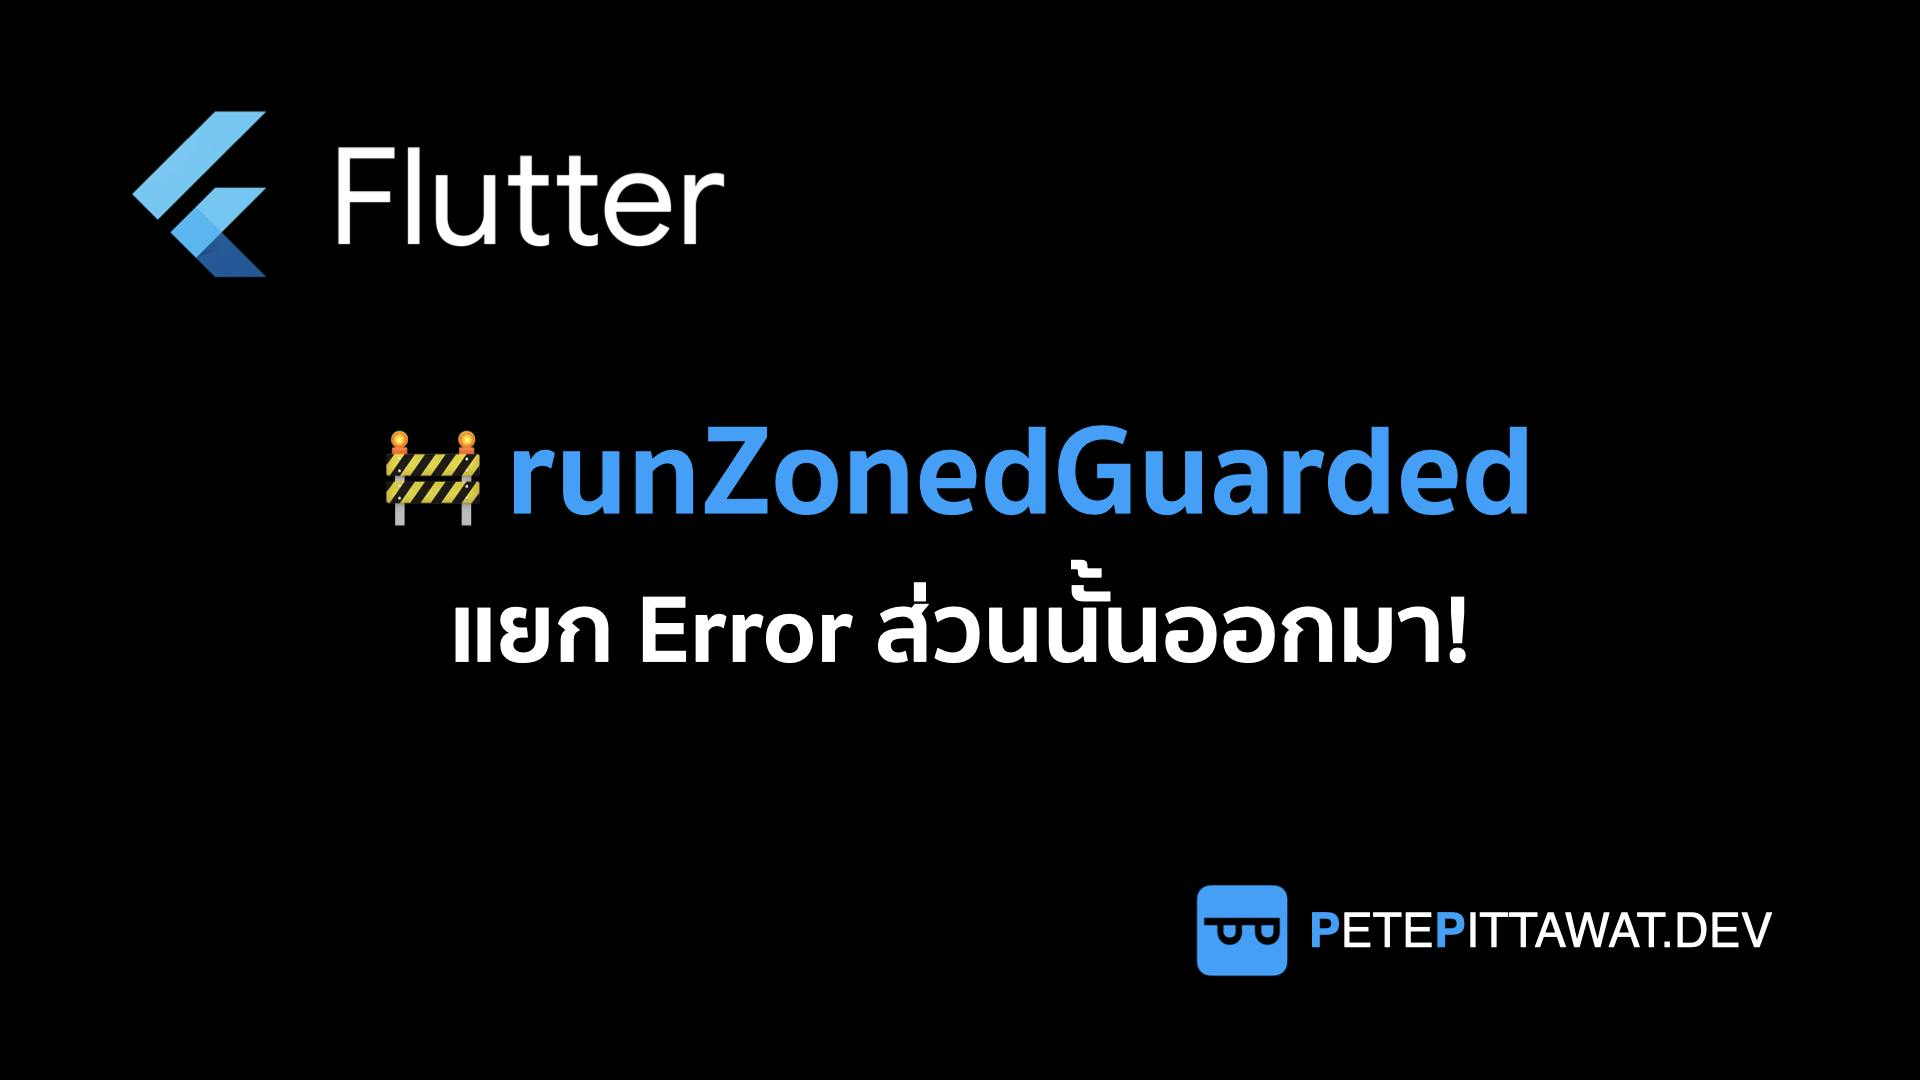 Cover Image for Flutter: runZonedGuarded เอาไว้ทำอะไรนะ?